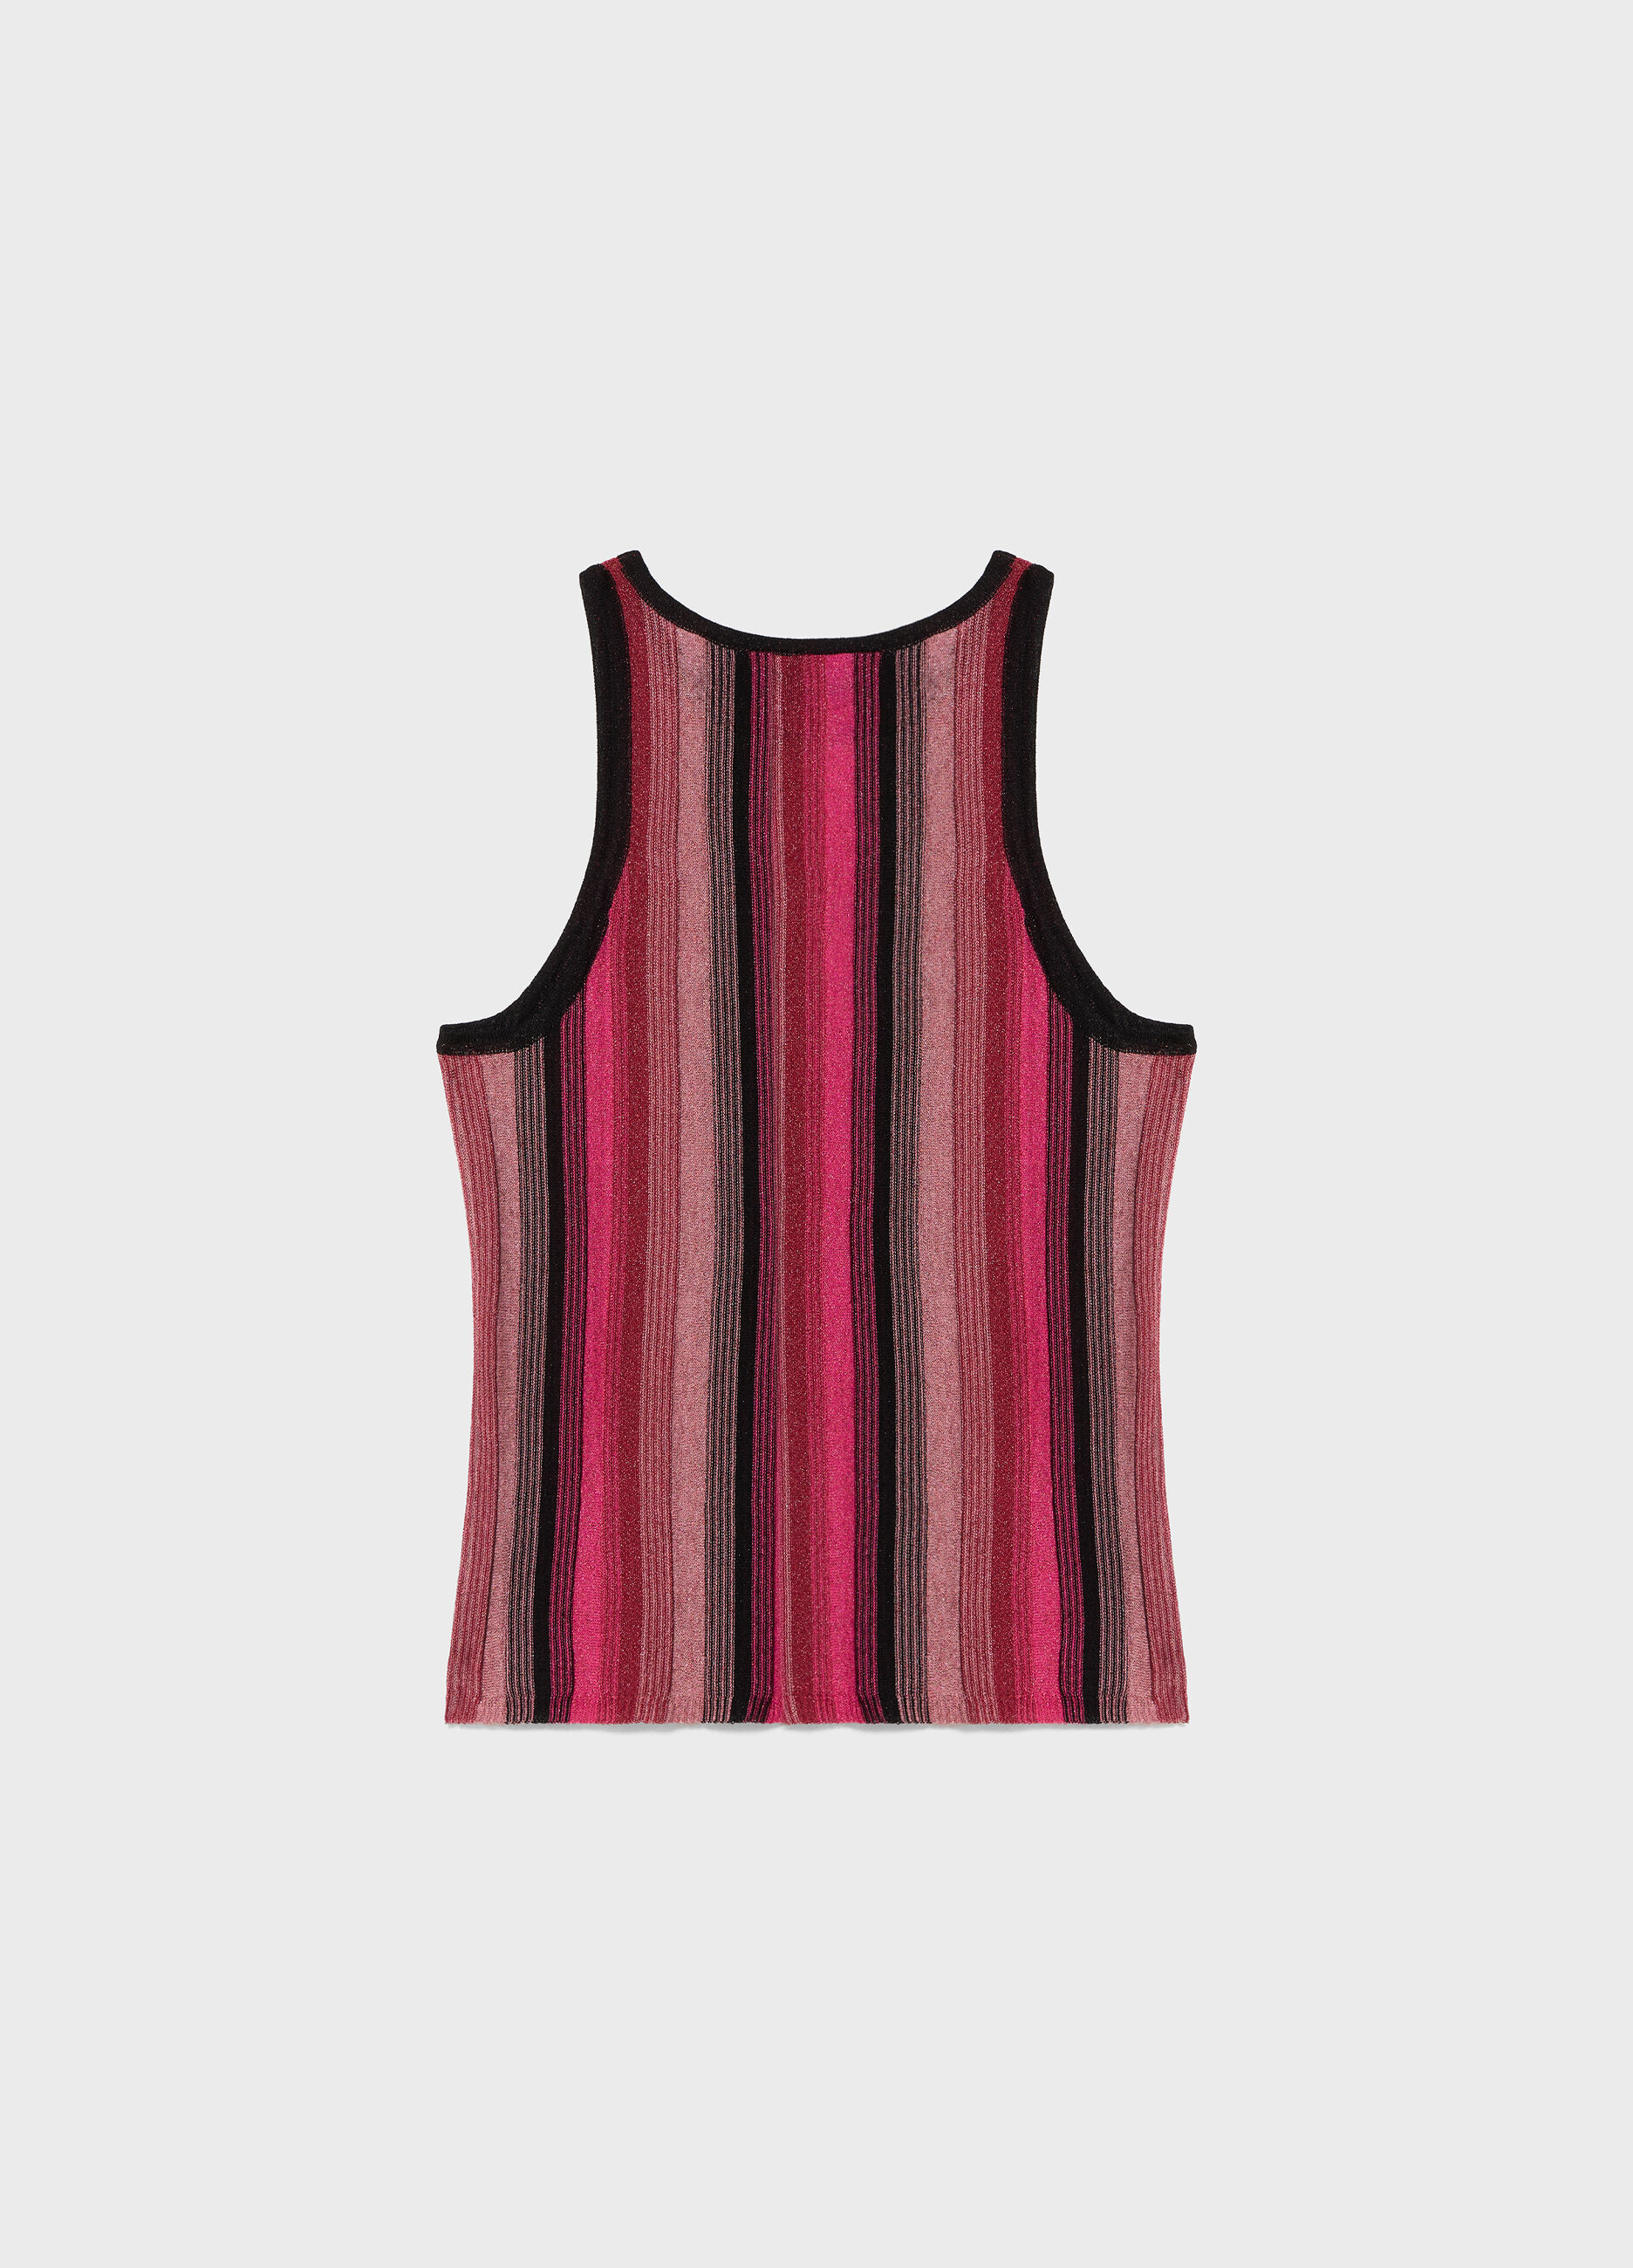 Pink and brown striped sleeveless top_5